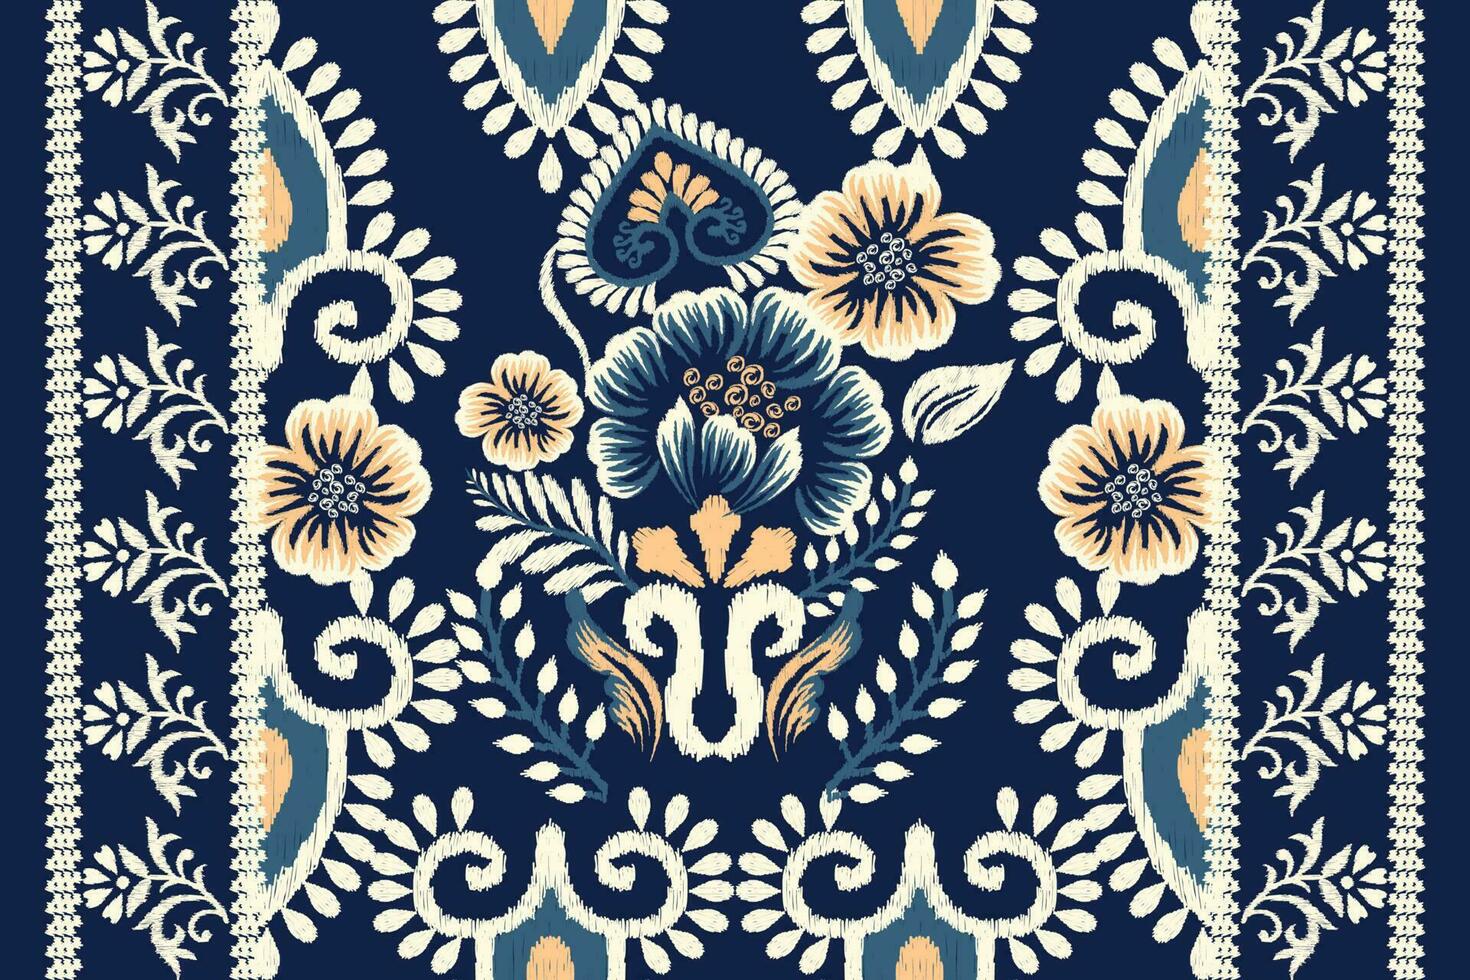 Ikat floral paisley embroidery on navy blue background.Ikat ethnic oriental pattern traditional.Aztec style abstract vector illustration.design for texture,fabric,clothing,wrapping,decoration,carpet.